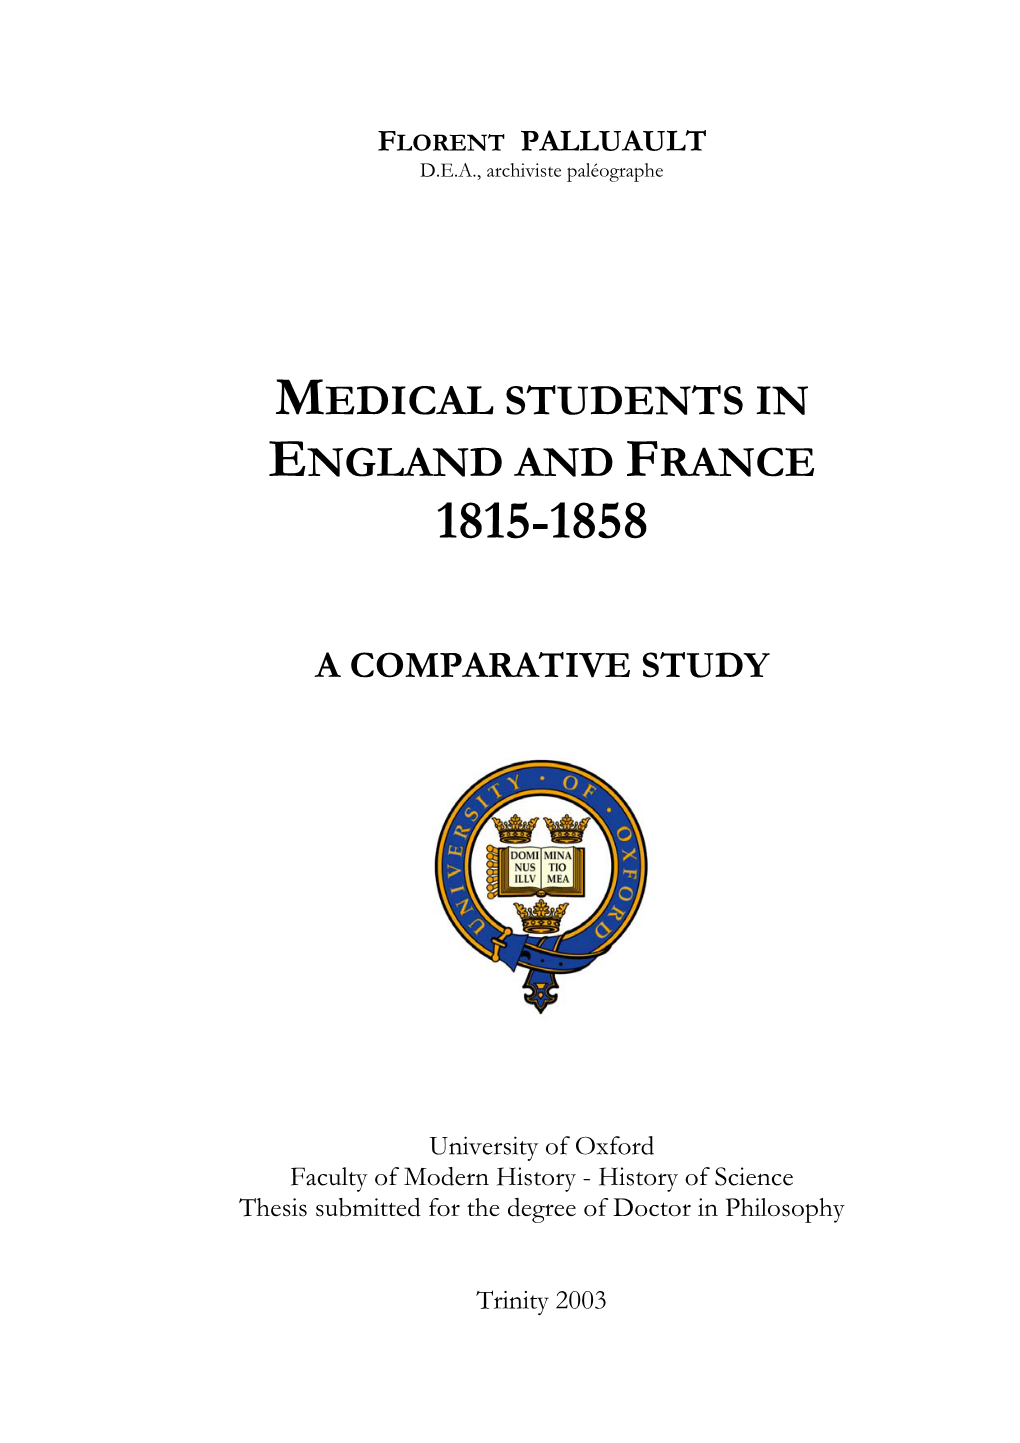 Medical Students in England and France, 1815-1858